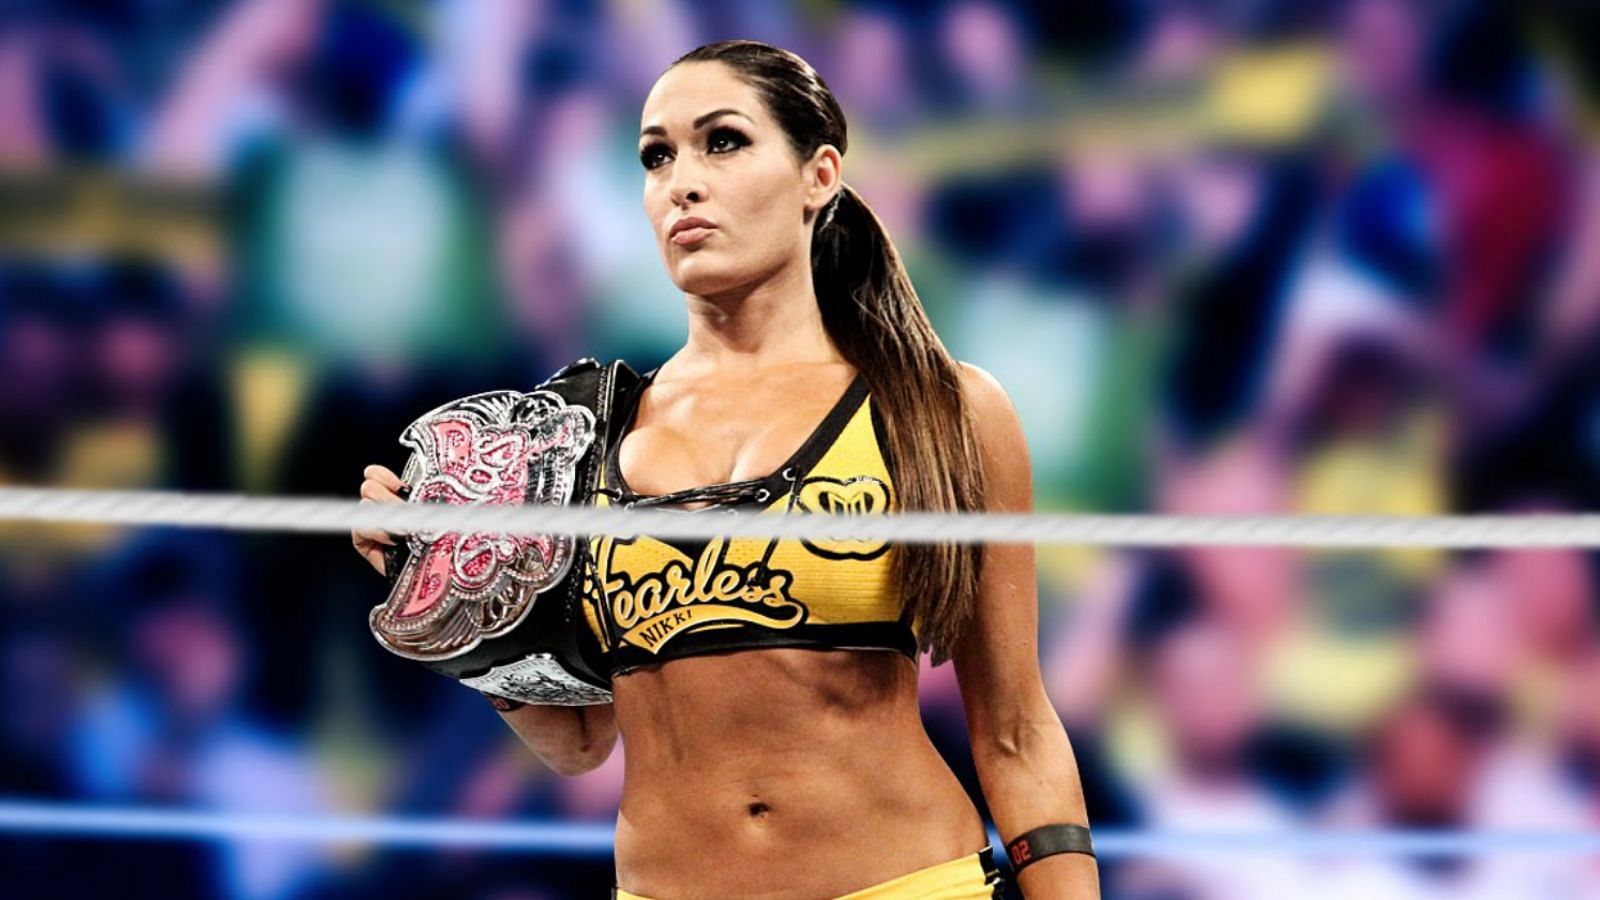 Nikki Bella has the record for longest individual reign at 301 days.